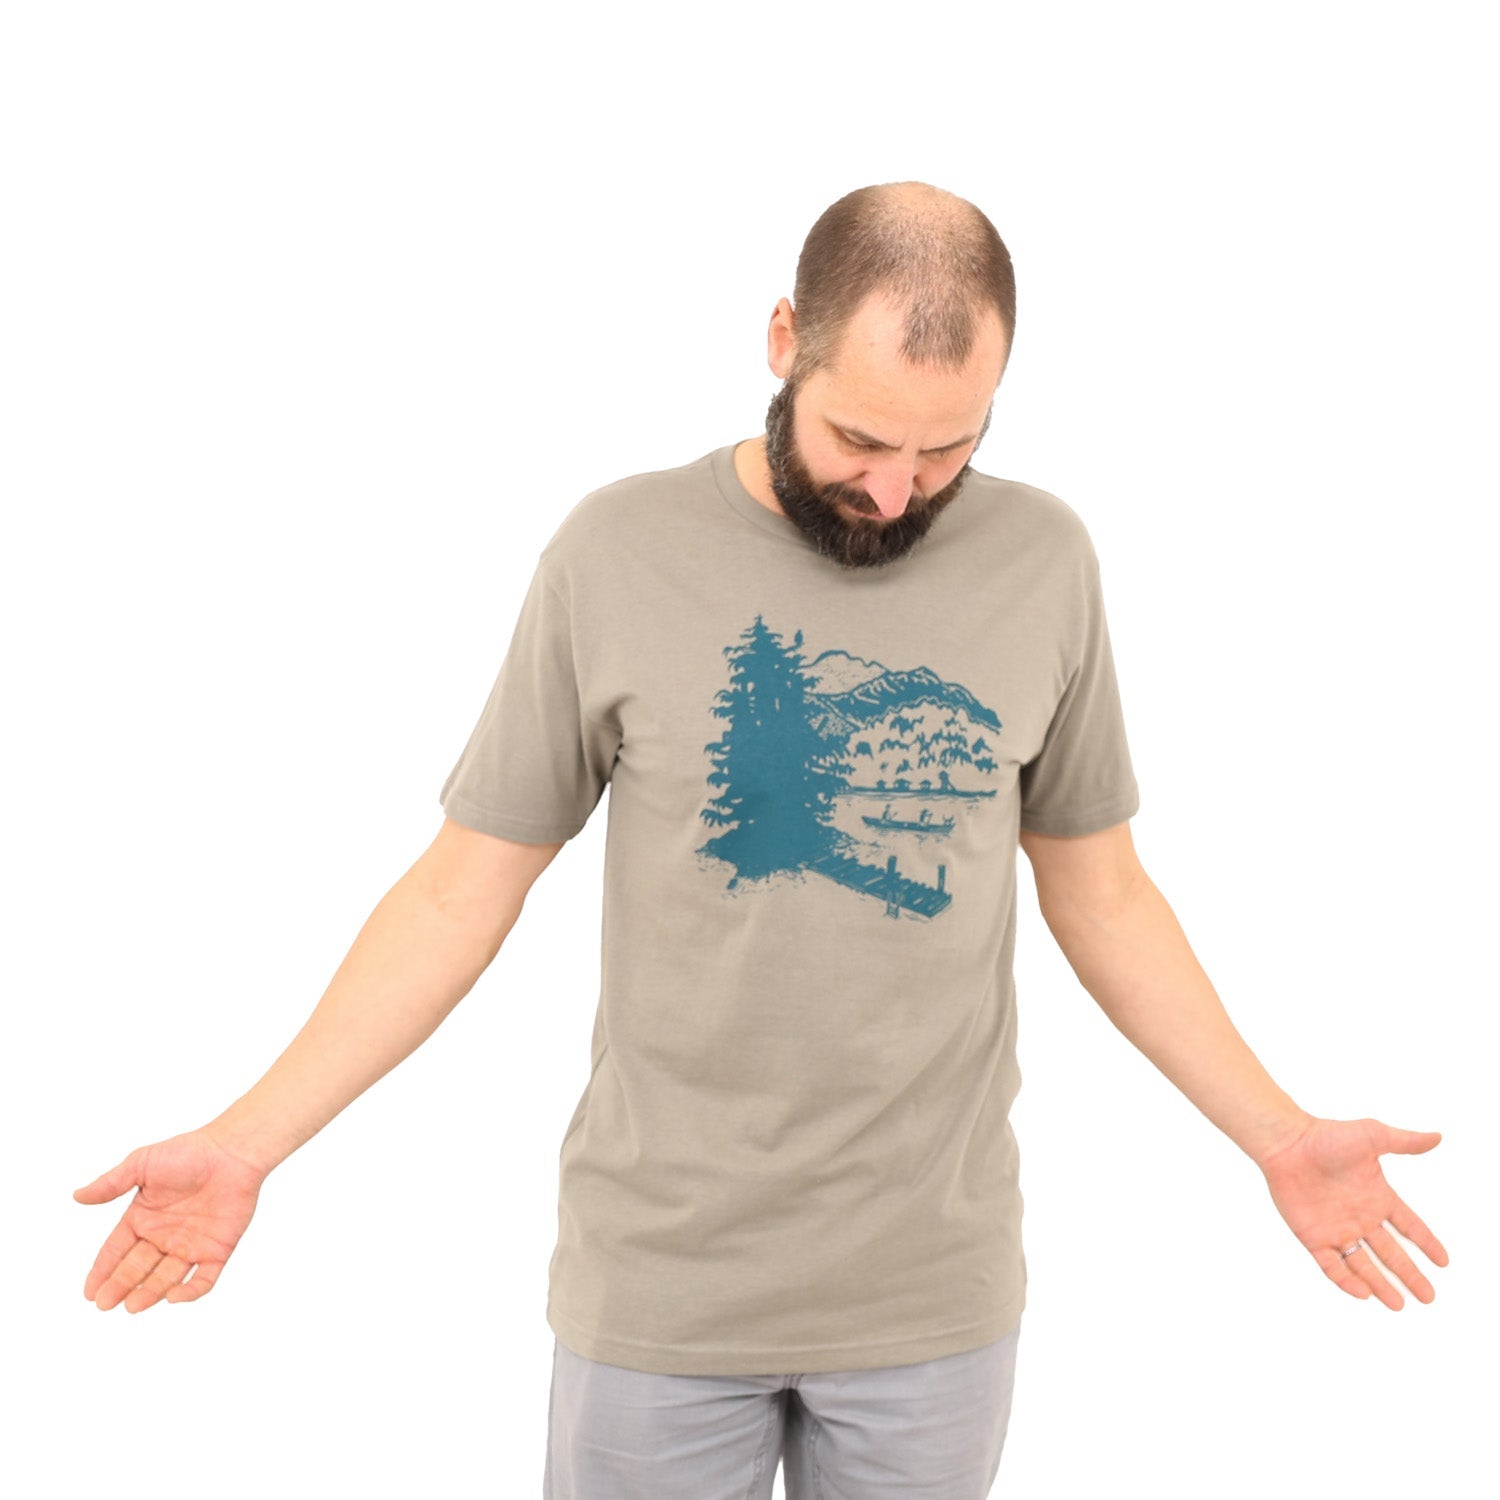 Man wearing a warm grey t-shirt with a green print of lakeside scene on it.